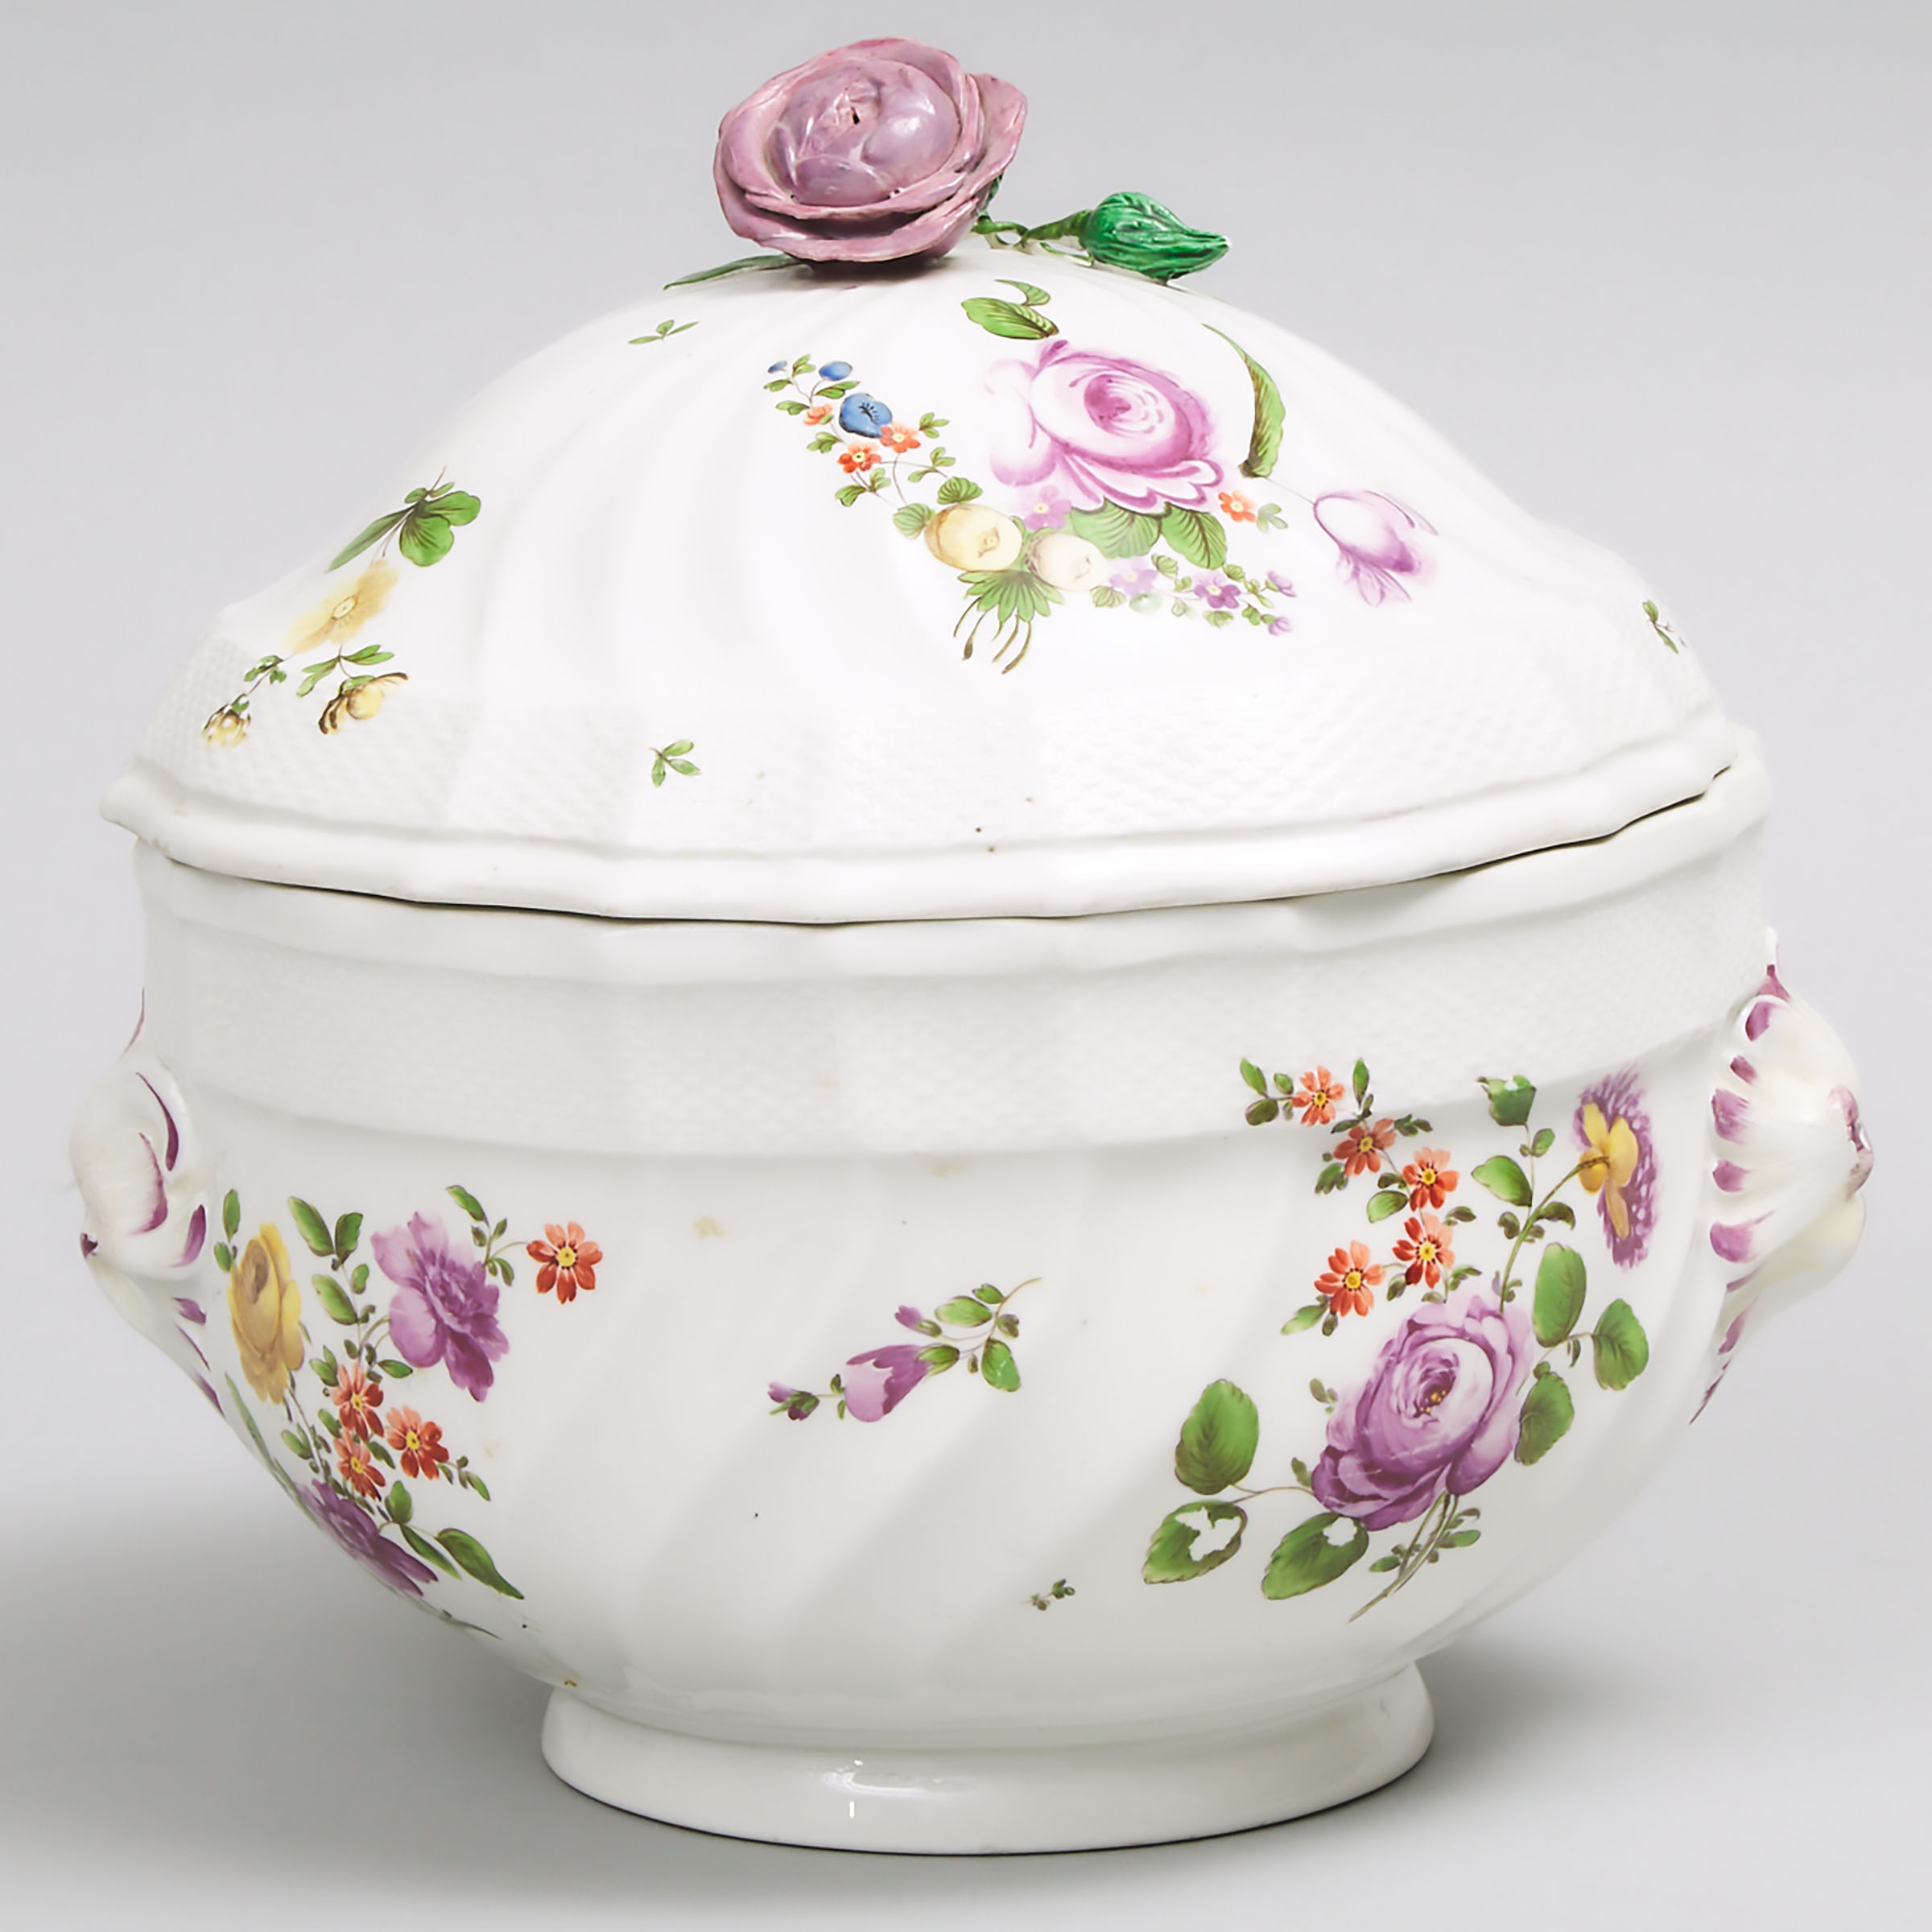 Vienna Polychrome Floral Decorated Tureen, late 18th century